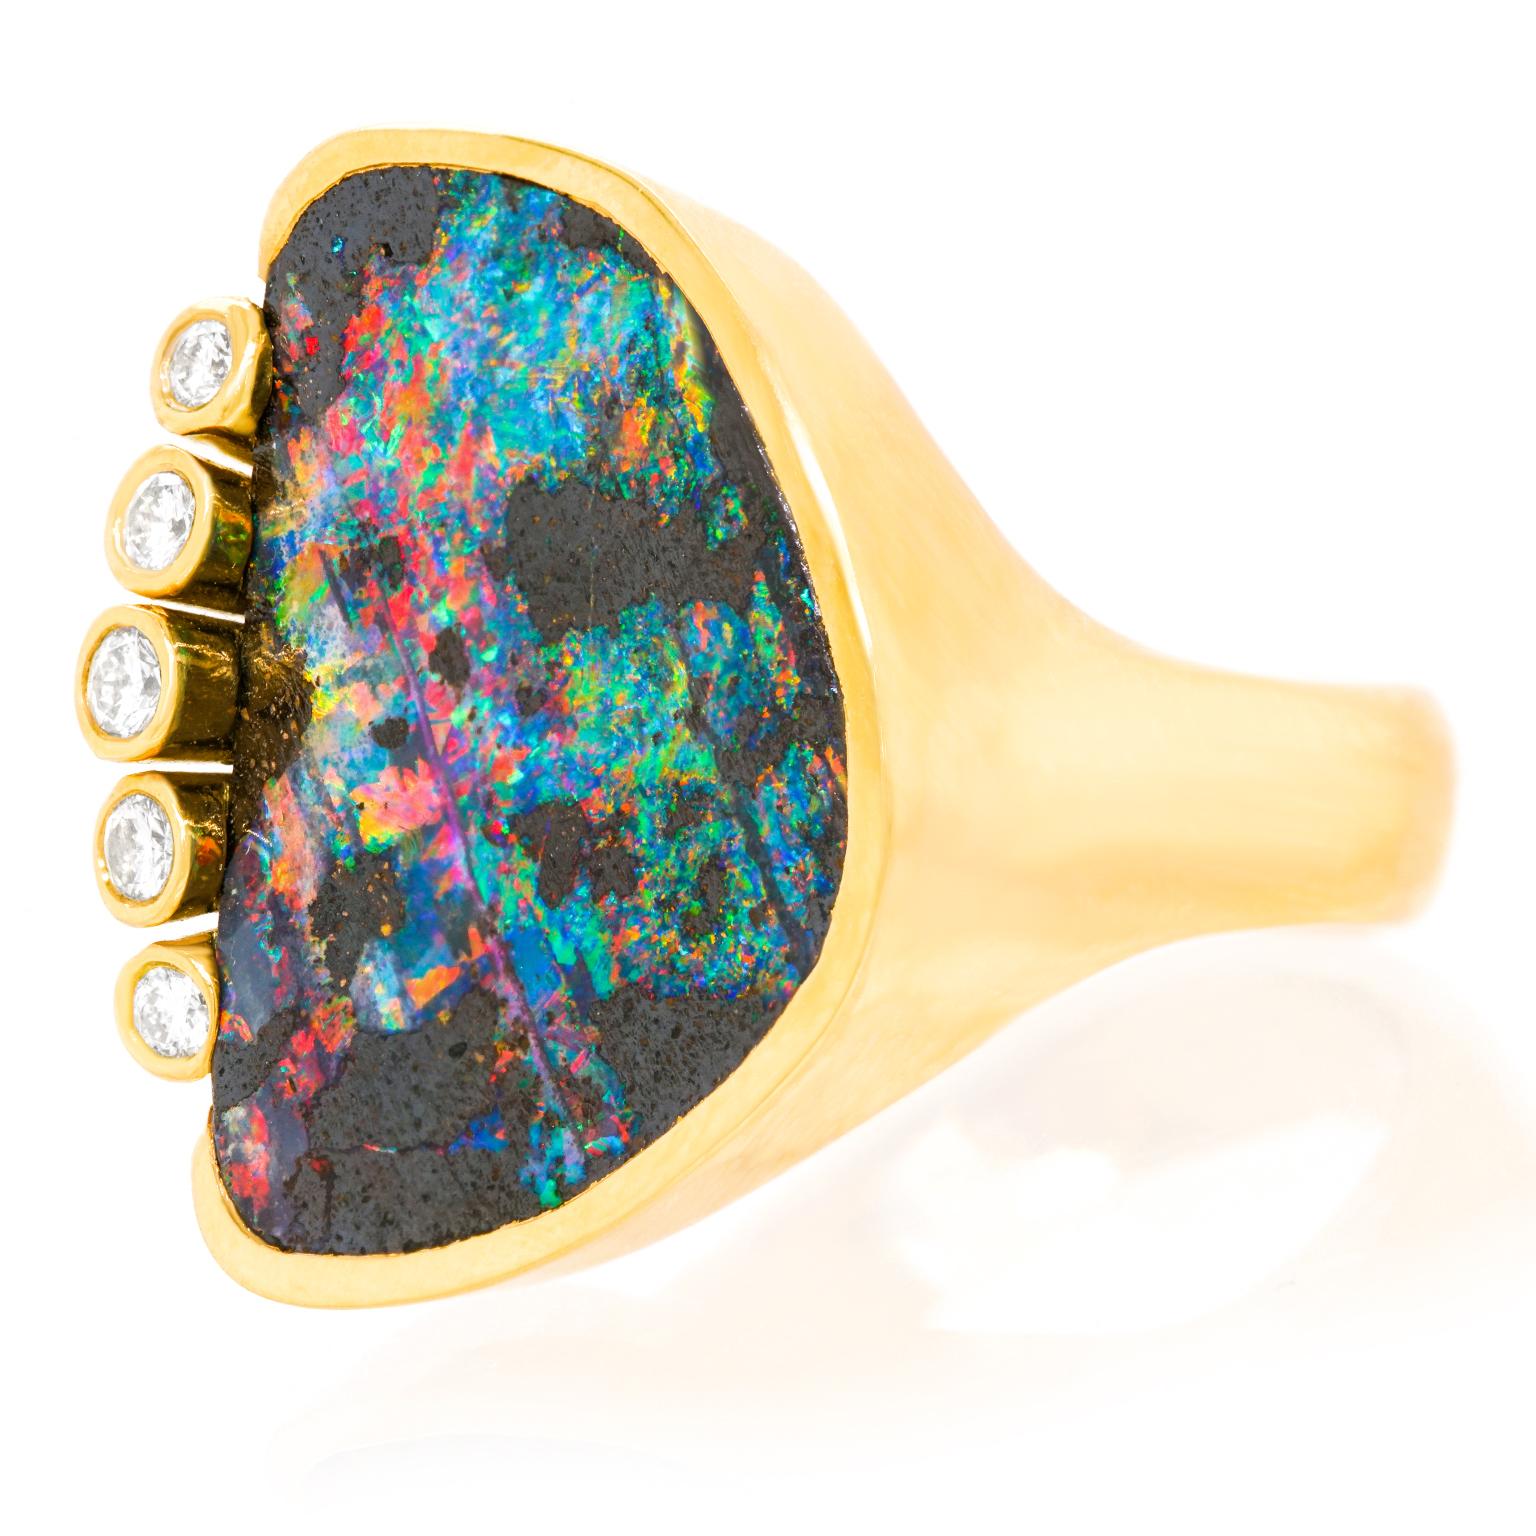 Swiss Modern Black Opal Diamond and Gold Ring In Excellent Condition For Sale In Litchfield, CT